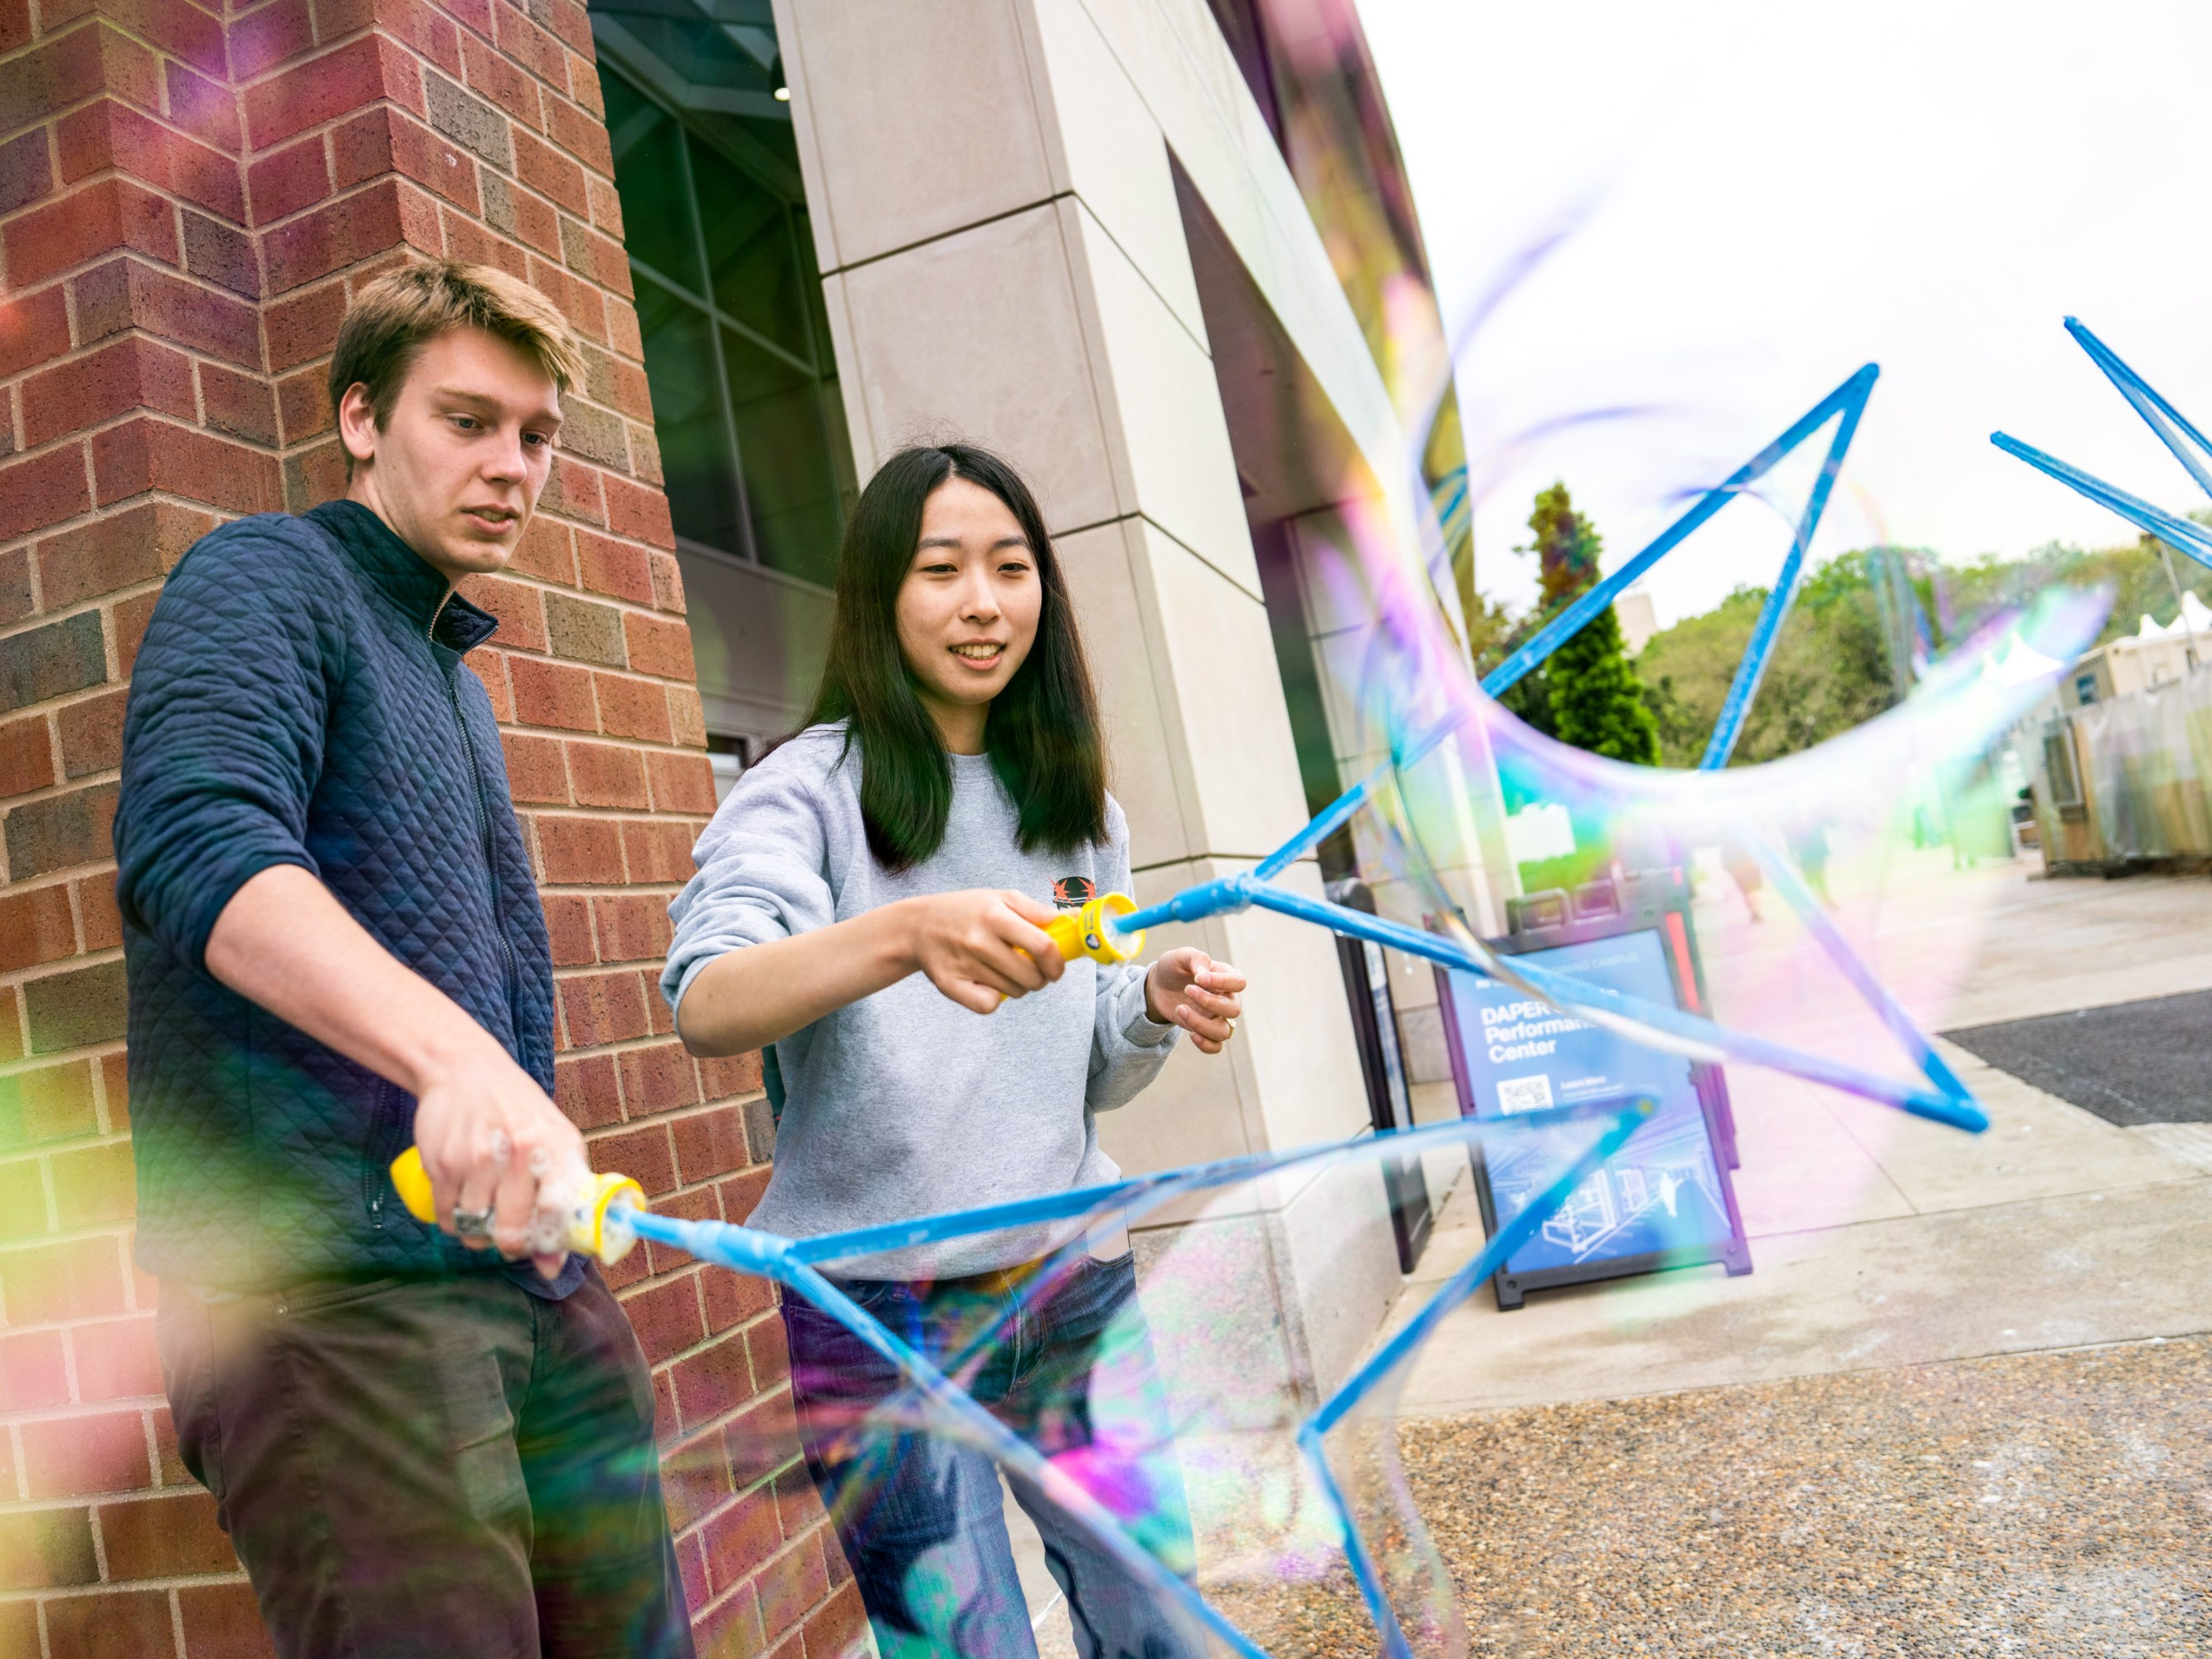 Two student using bubble wands